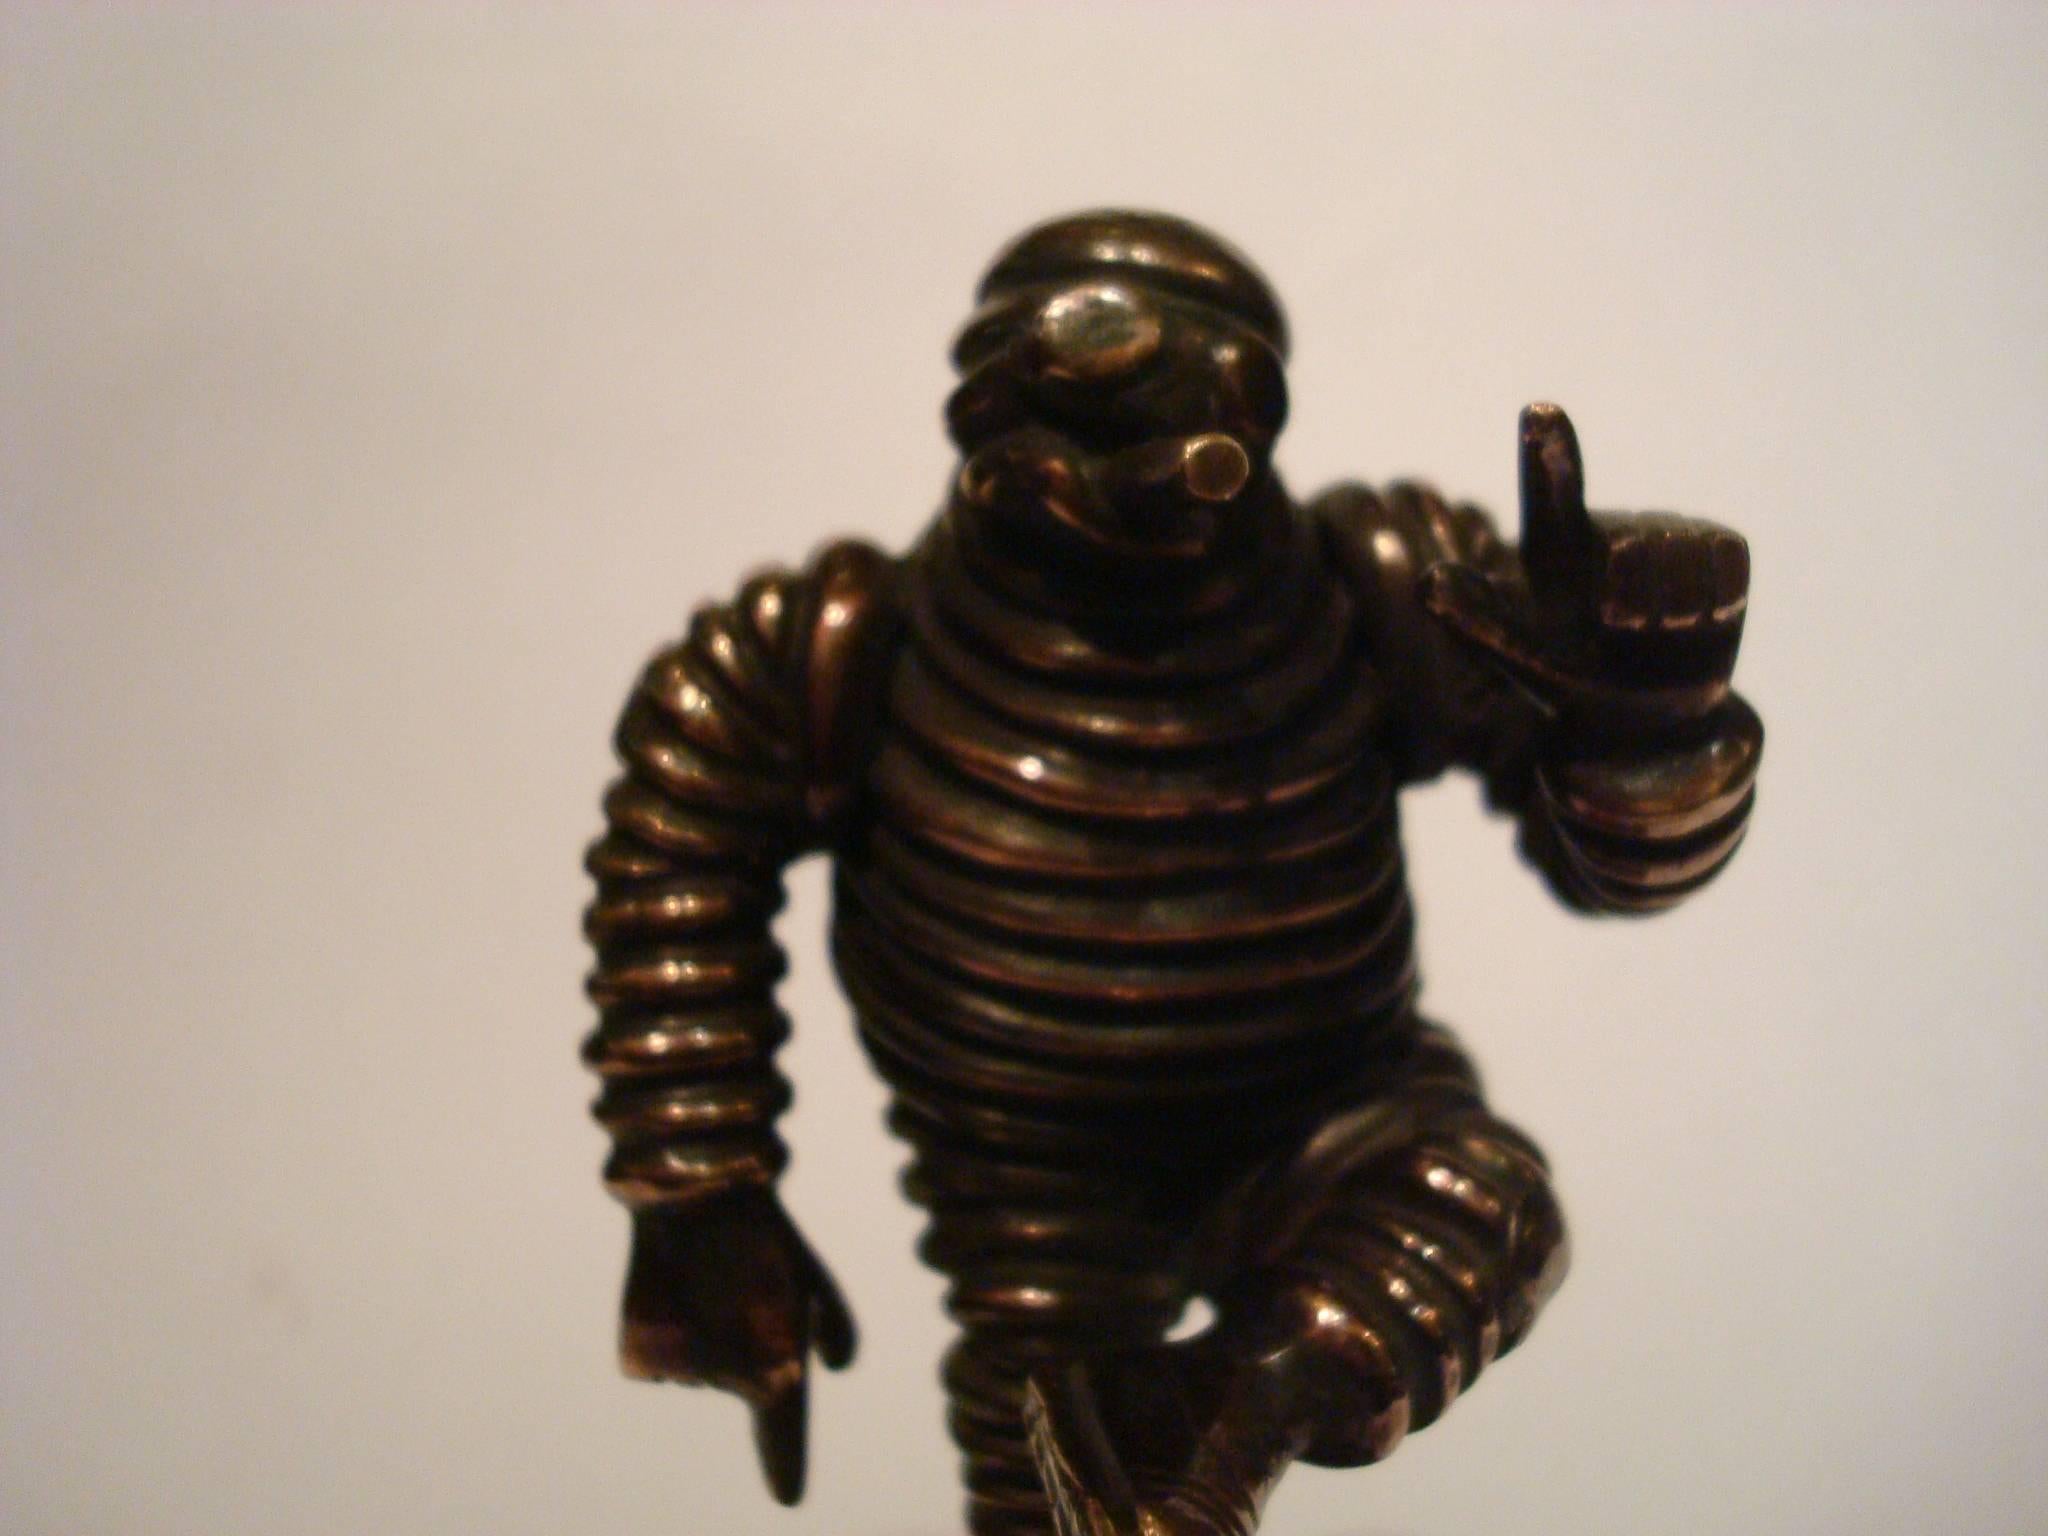 This is a highly collectible Michelin Man bronze car mascot.
It´s approximate 4 inch tall depiction of the Michelin man, also known as Bibendum, joyfully raises his arm while jauntily kicking up his leg. Also recognized as Bib or Bibelobis, the